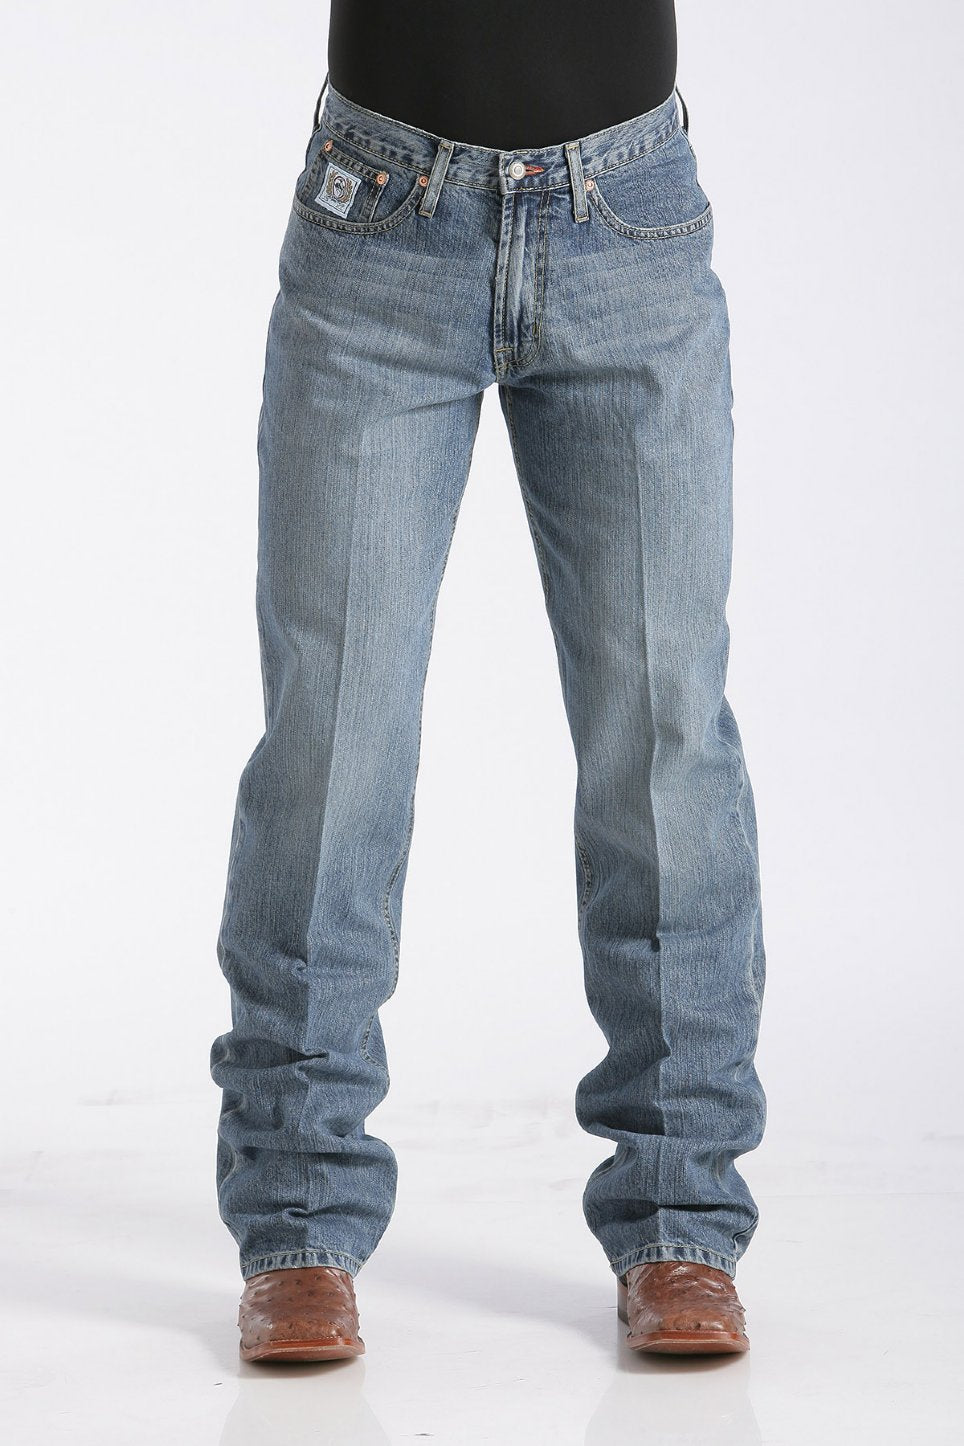 Outpost Makers Original Straight Stretch Jean - Men's Jeans in Level